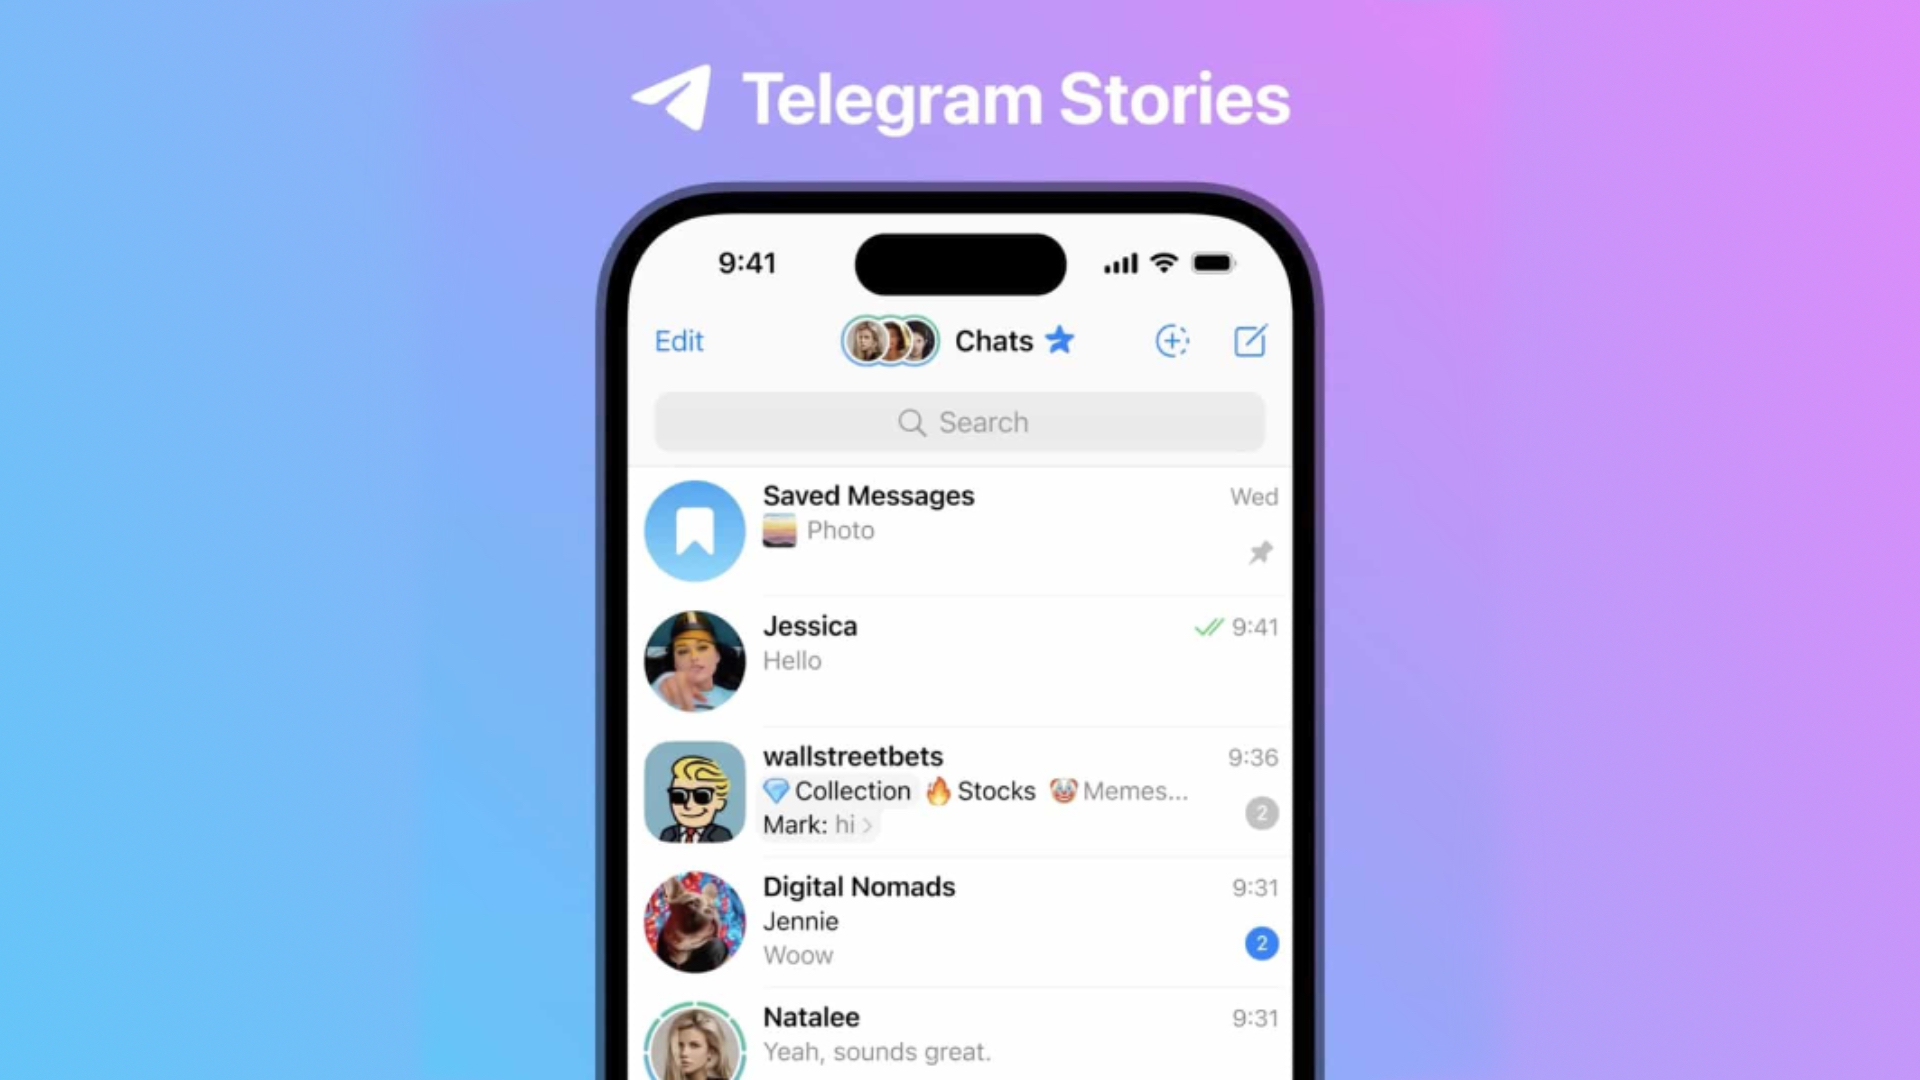 WhatsApp to soon get animated stickers based on user avatars - SamMobile